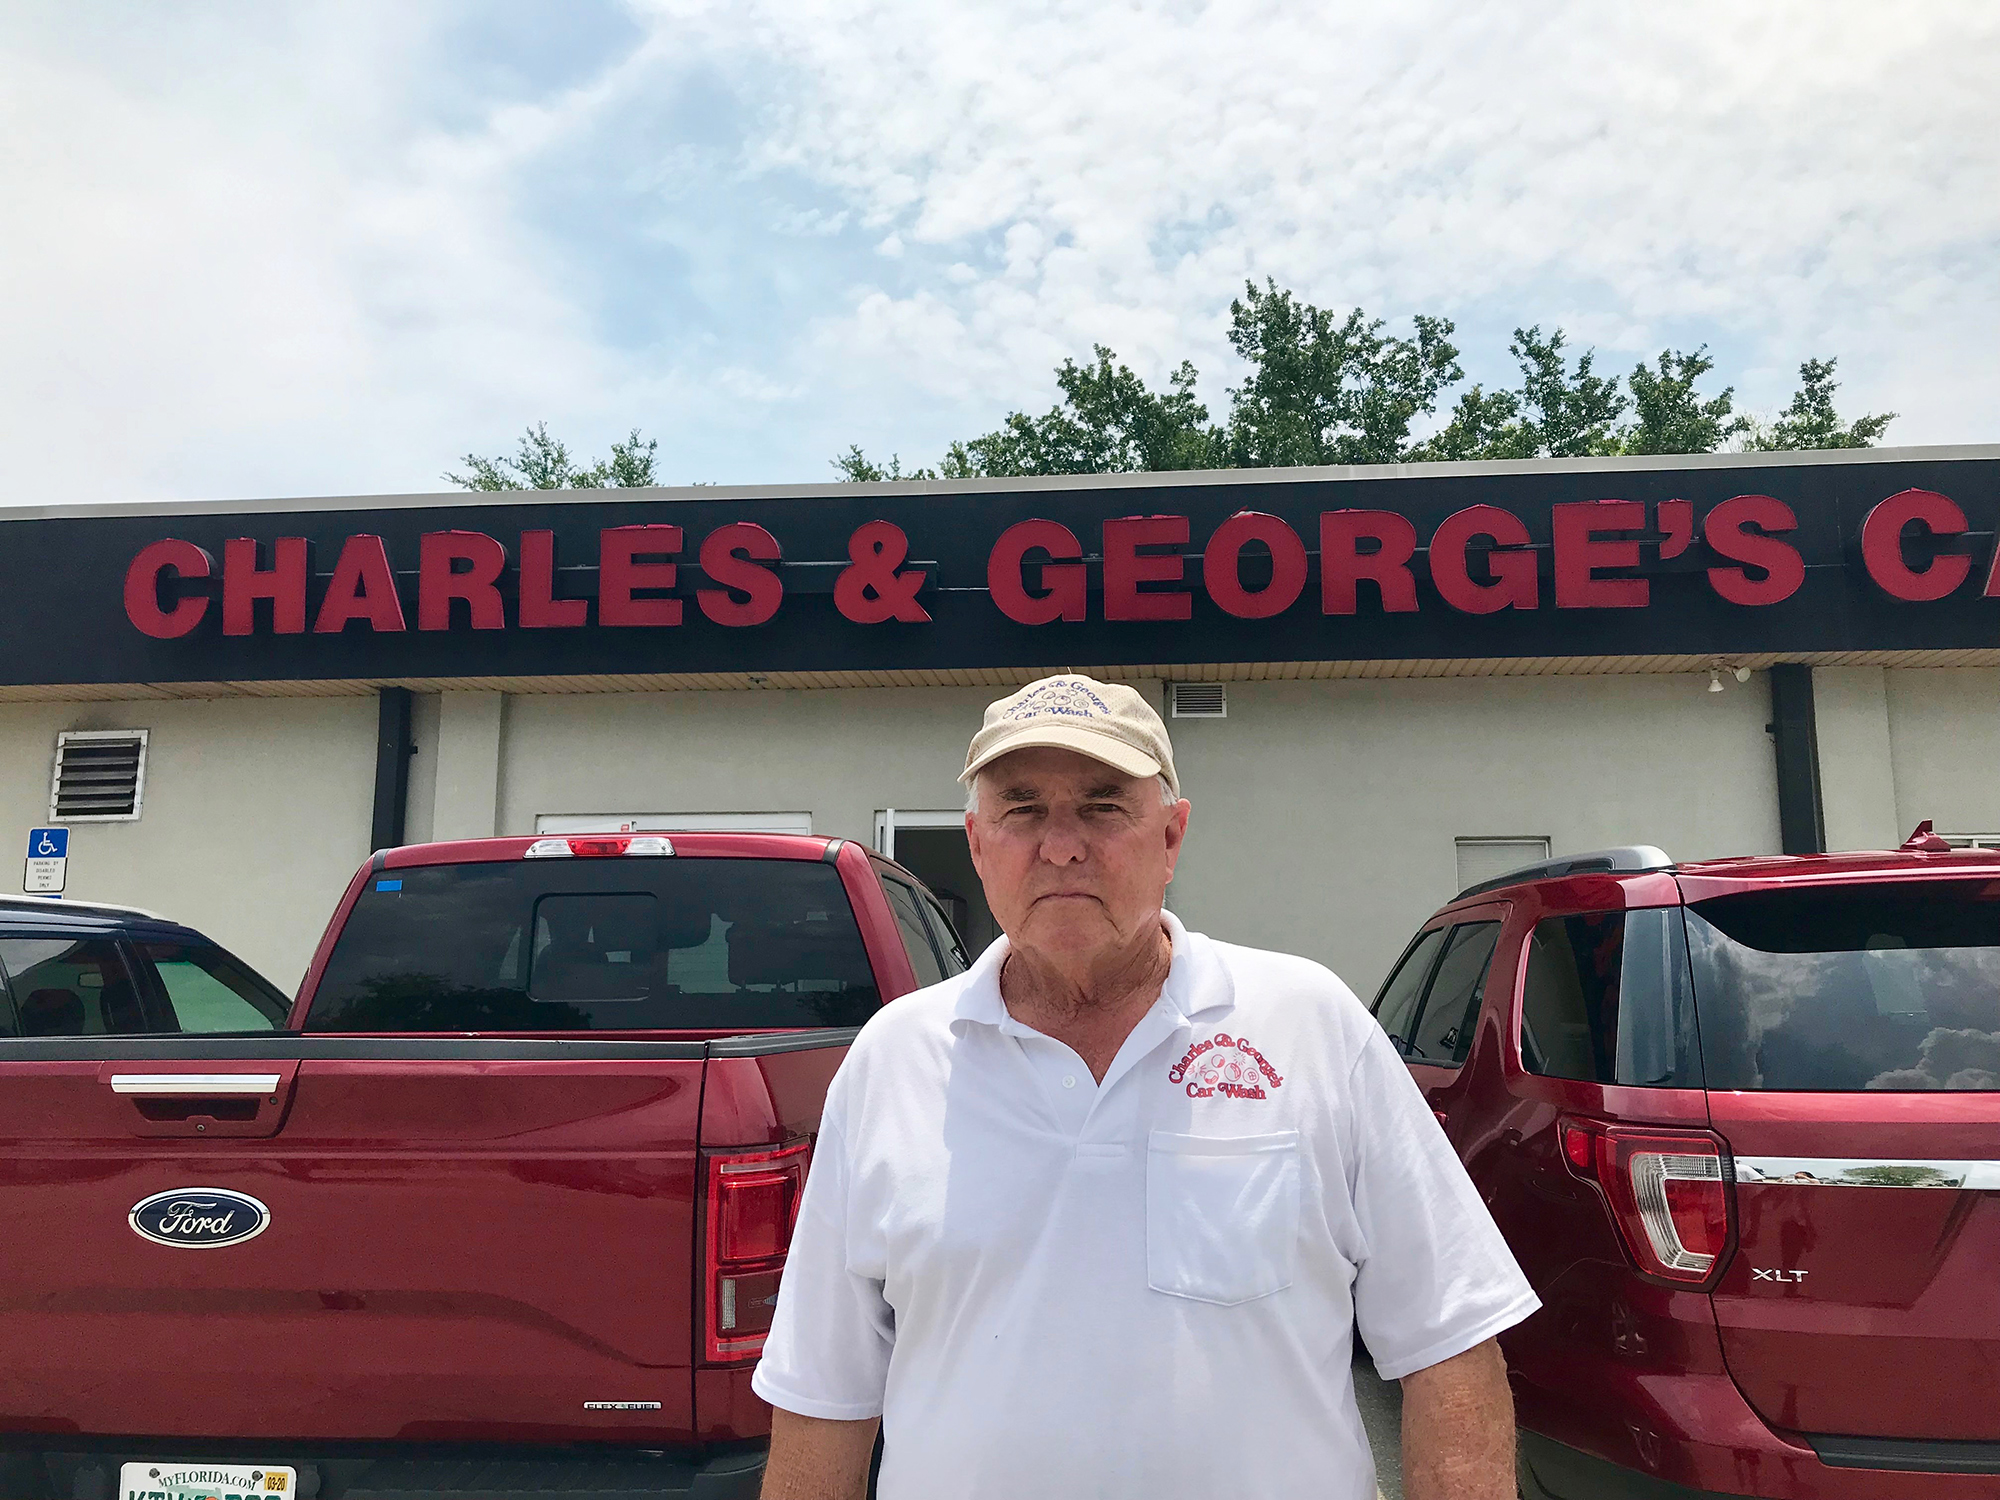 Charles Holt is closing the Roosevelt car wash, but still operates two other locations.